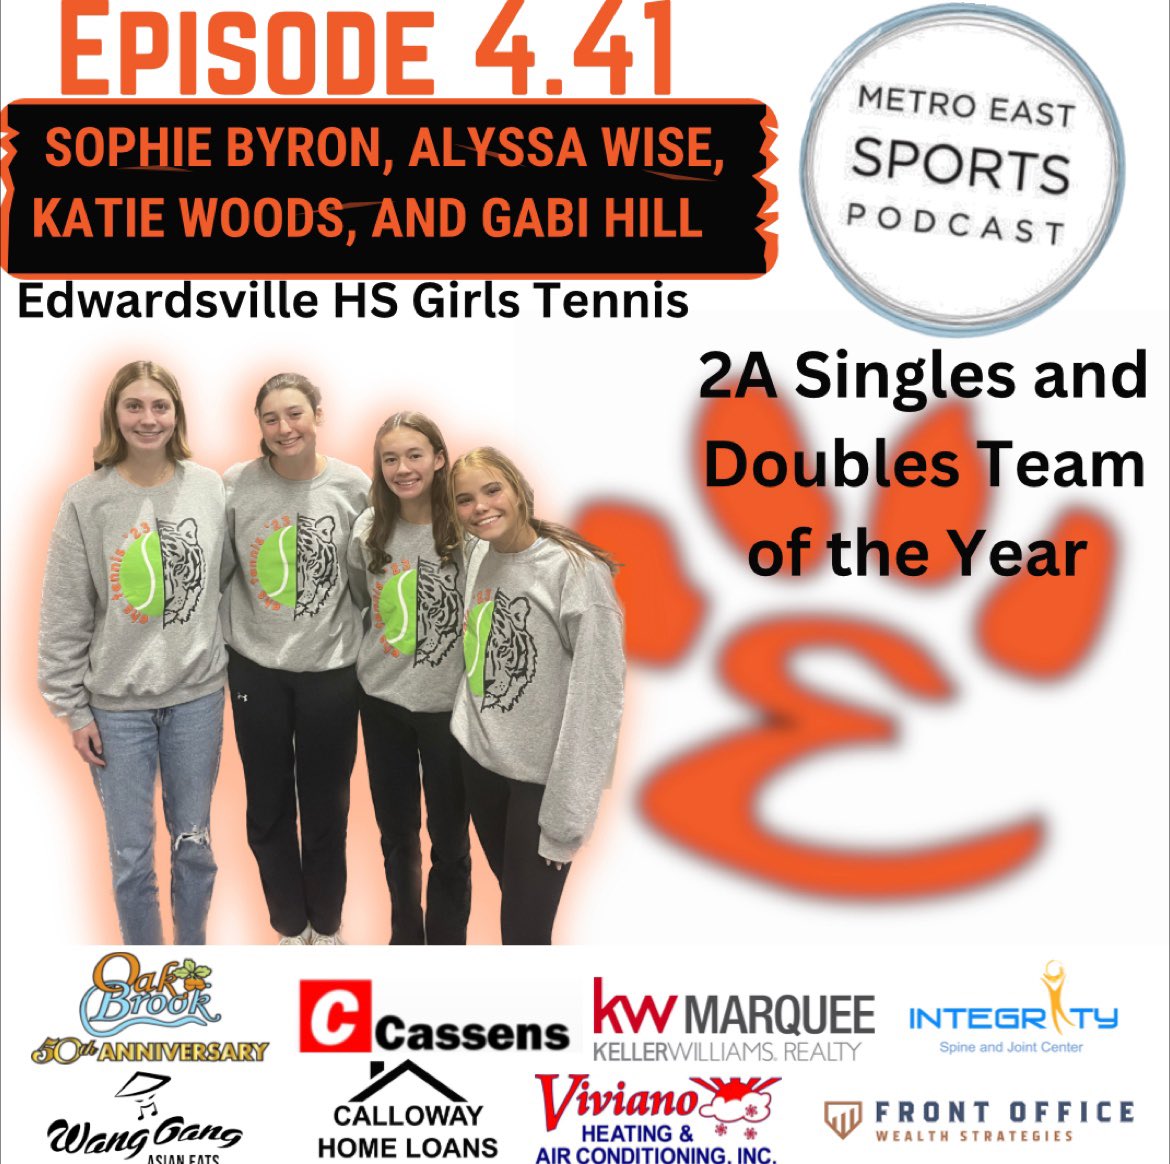 Check out the ladies of Edwardsville HS tennis in our latest! Listen ——> podcasts.apple.com/us/podcast/met….